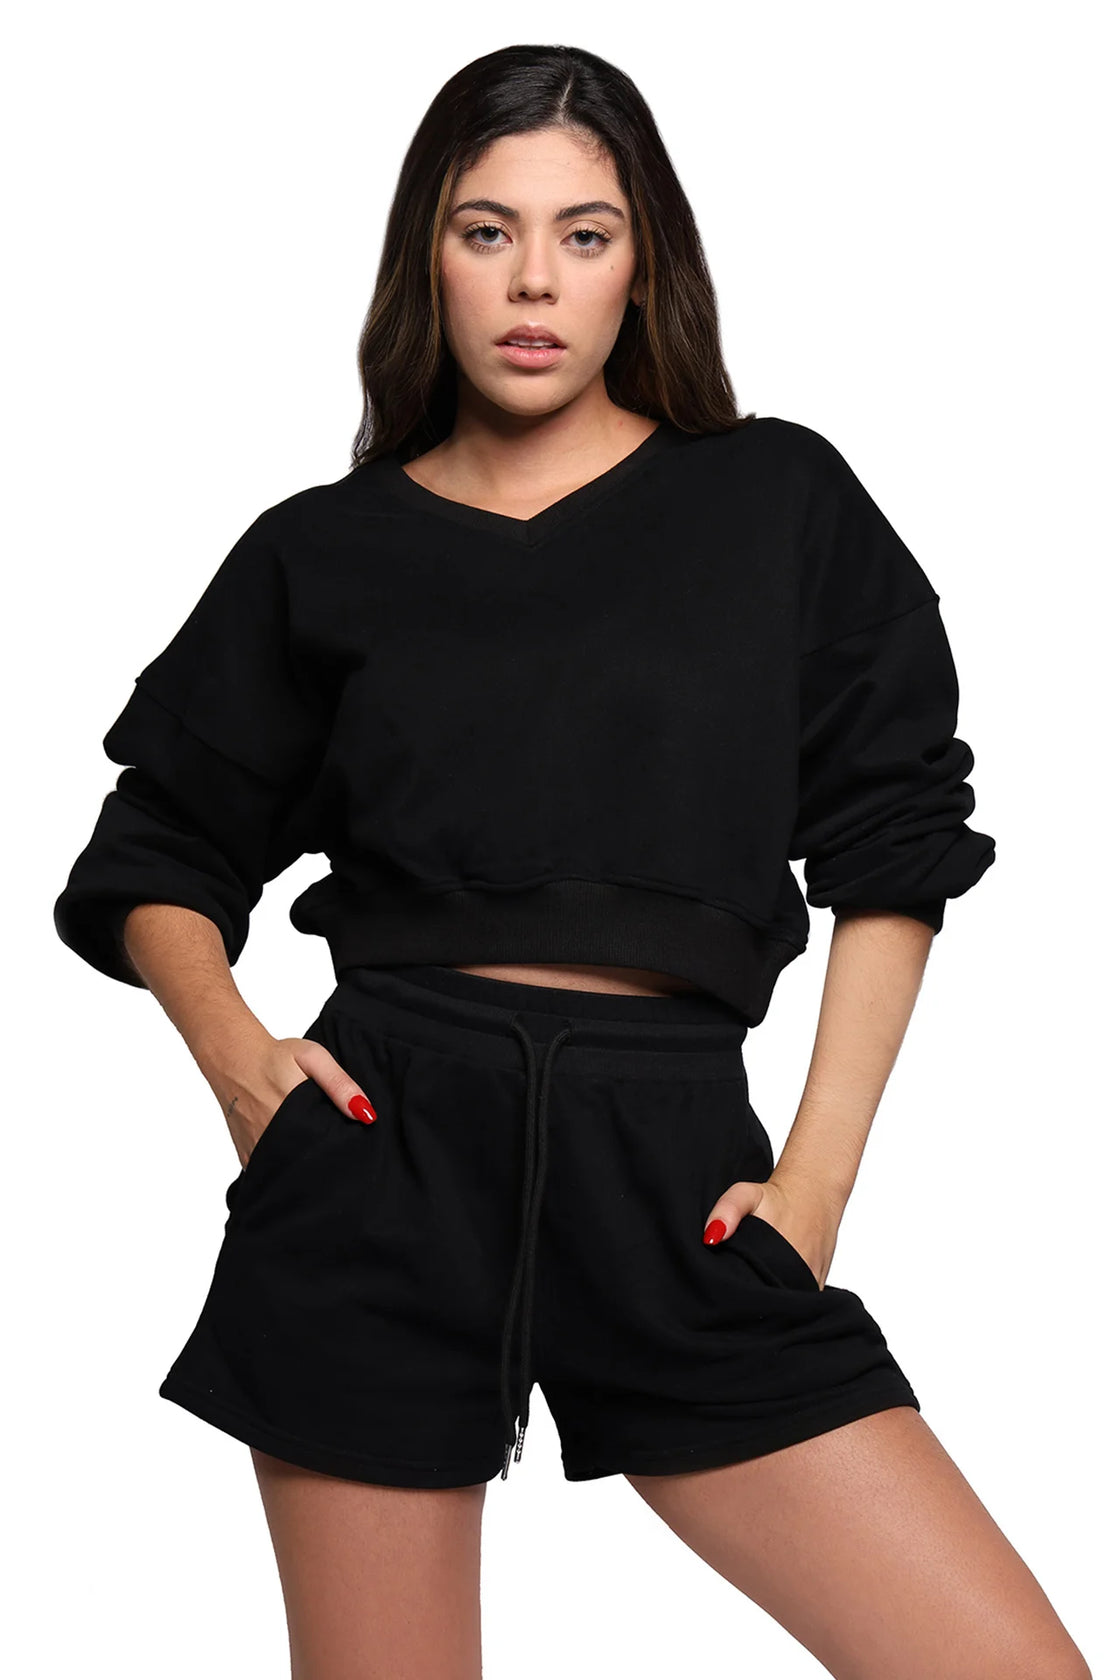 V-Neck pullover in black with shorts